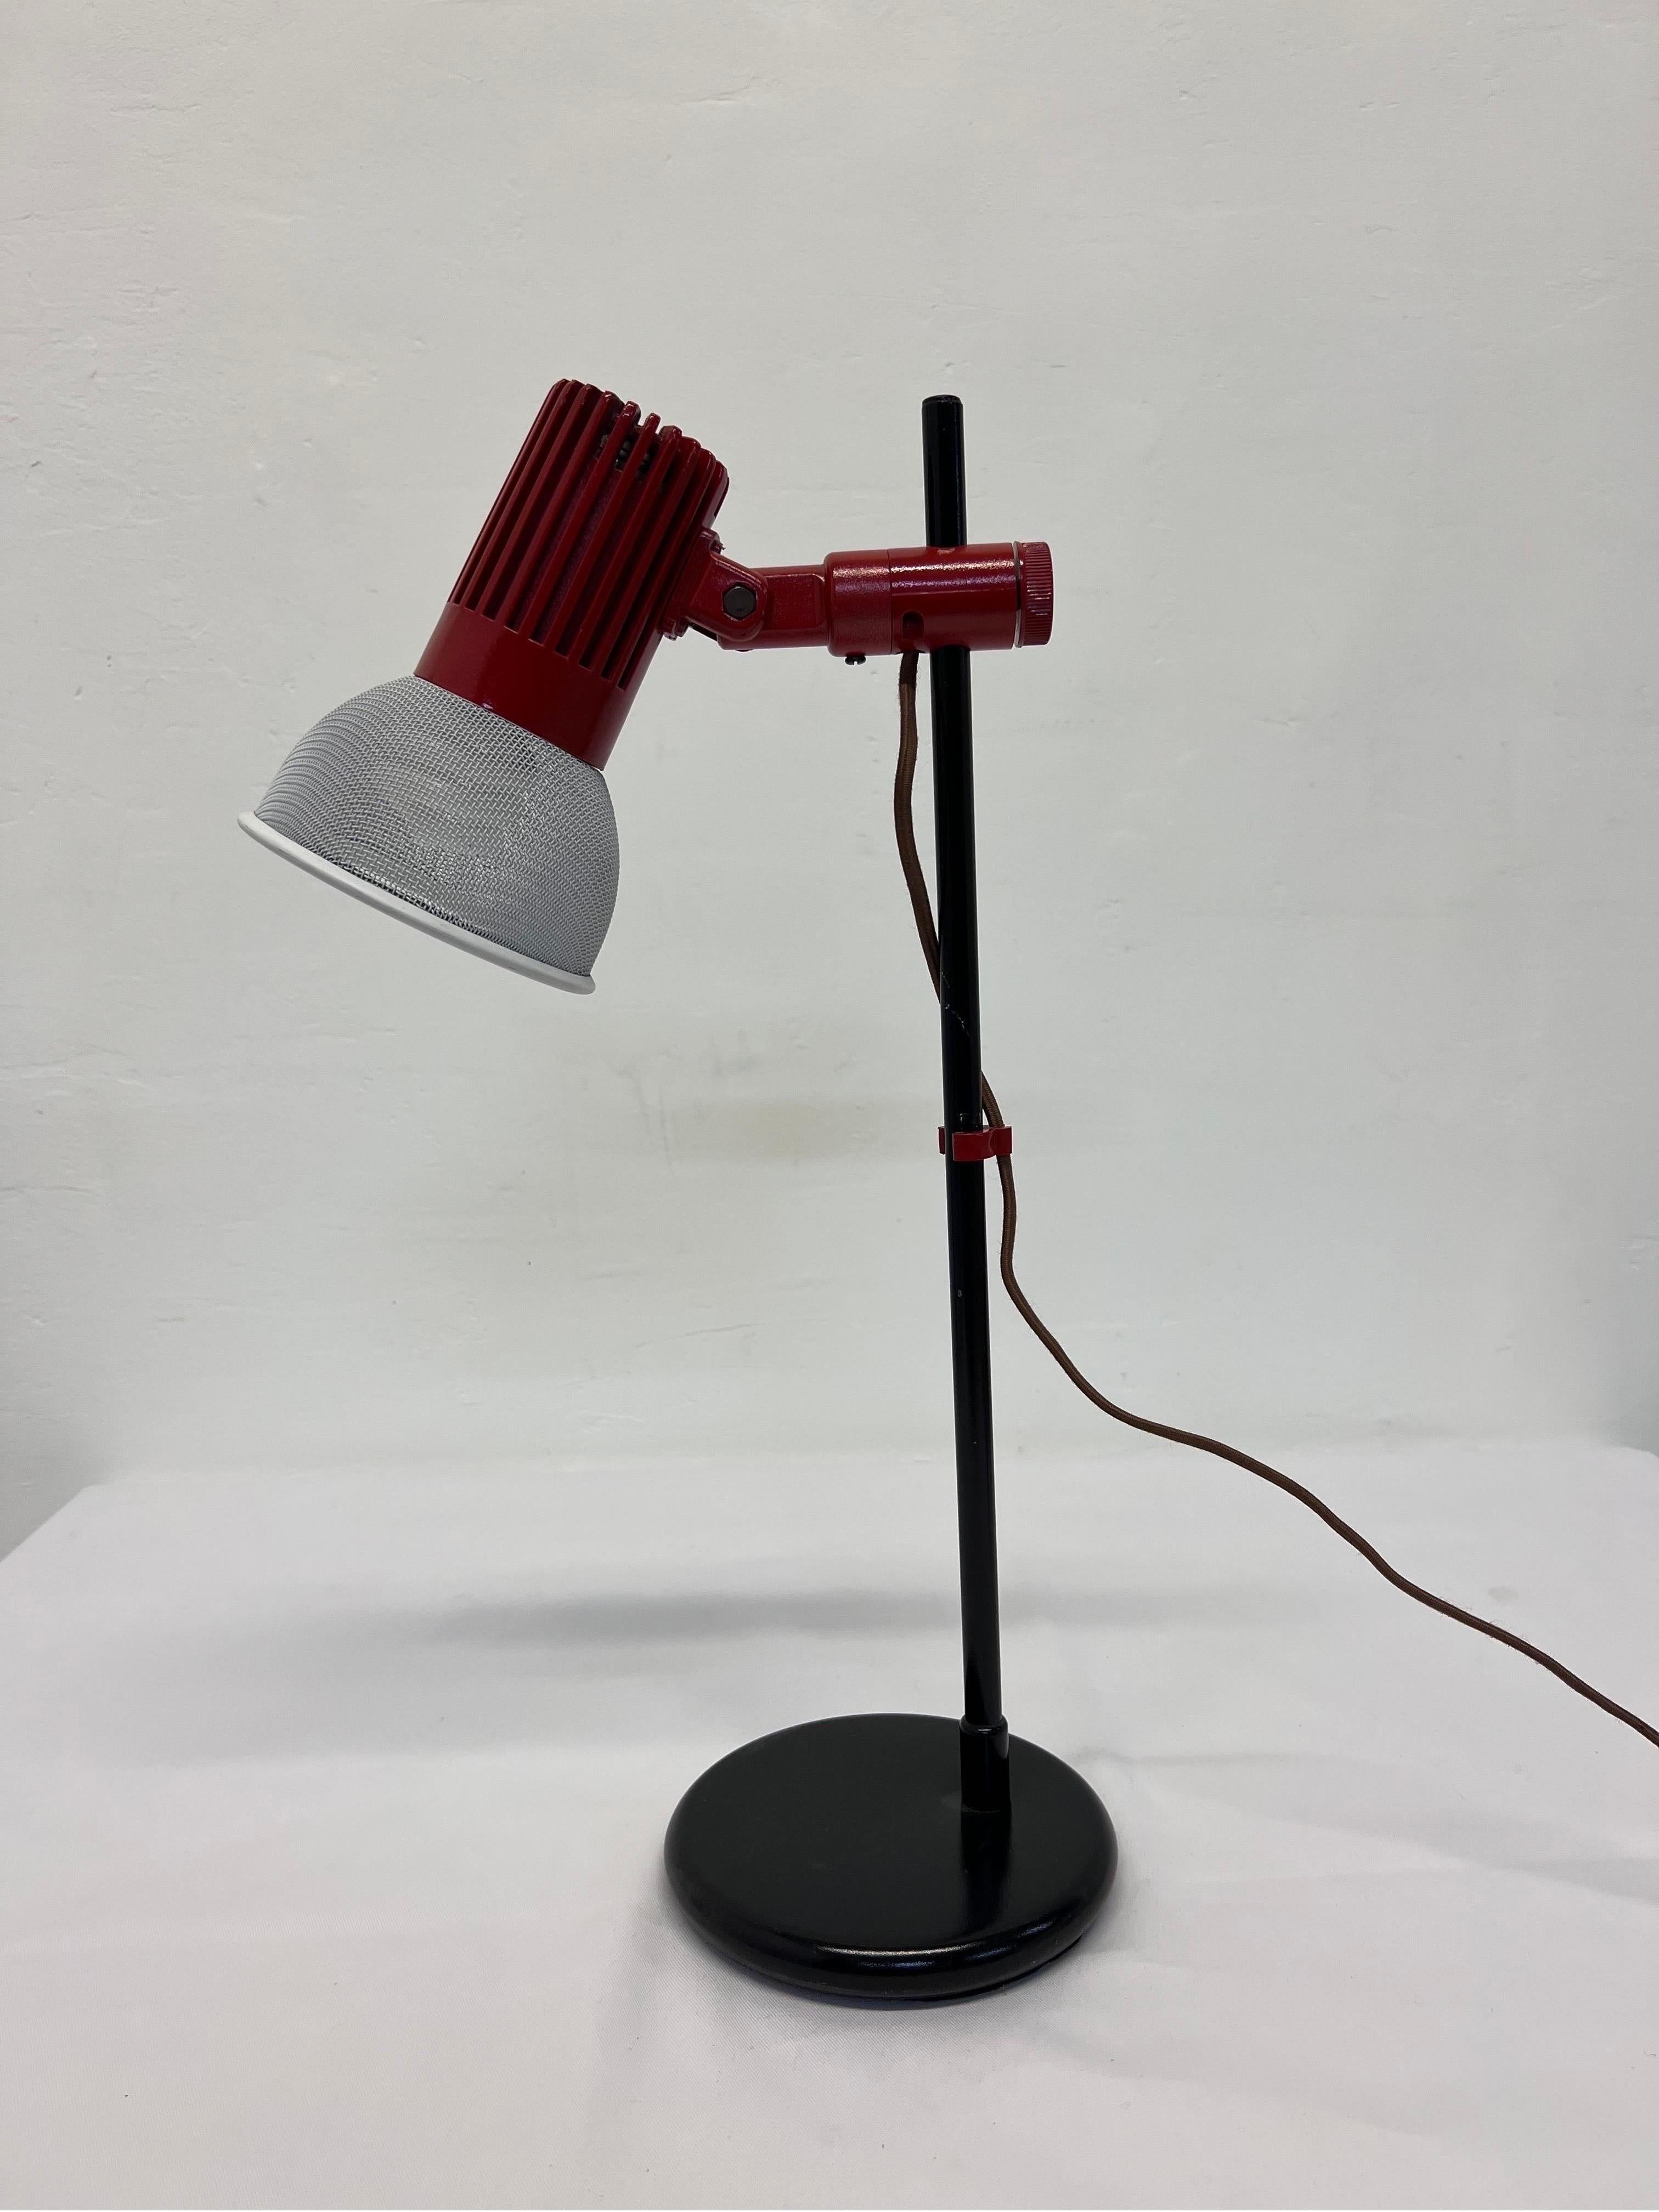 Mid-century red, black and white desk or table lamp with adjustable height and multi-directional perforated shade by Unilite International. Cord is for US outlets and has an in-line on/off switch.